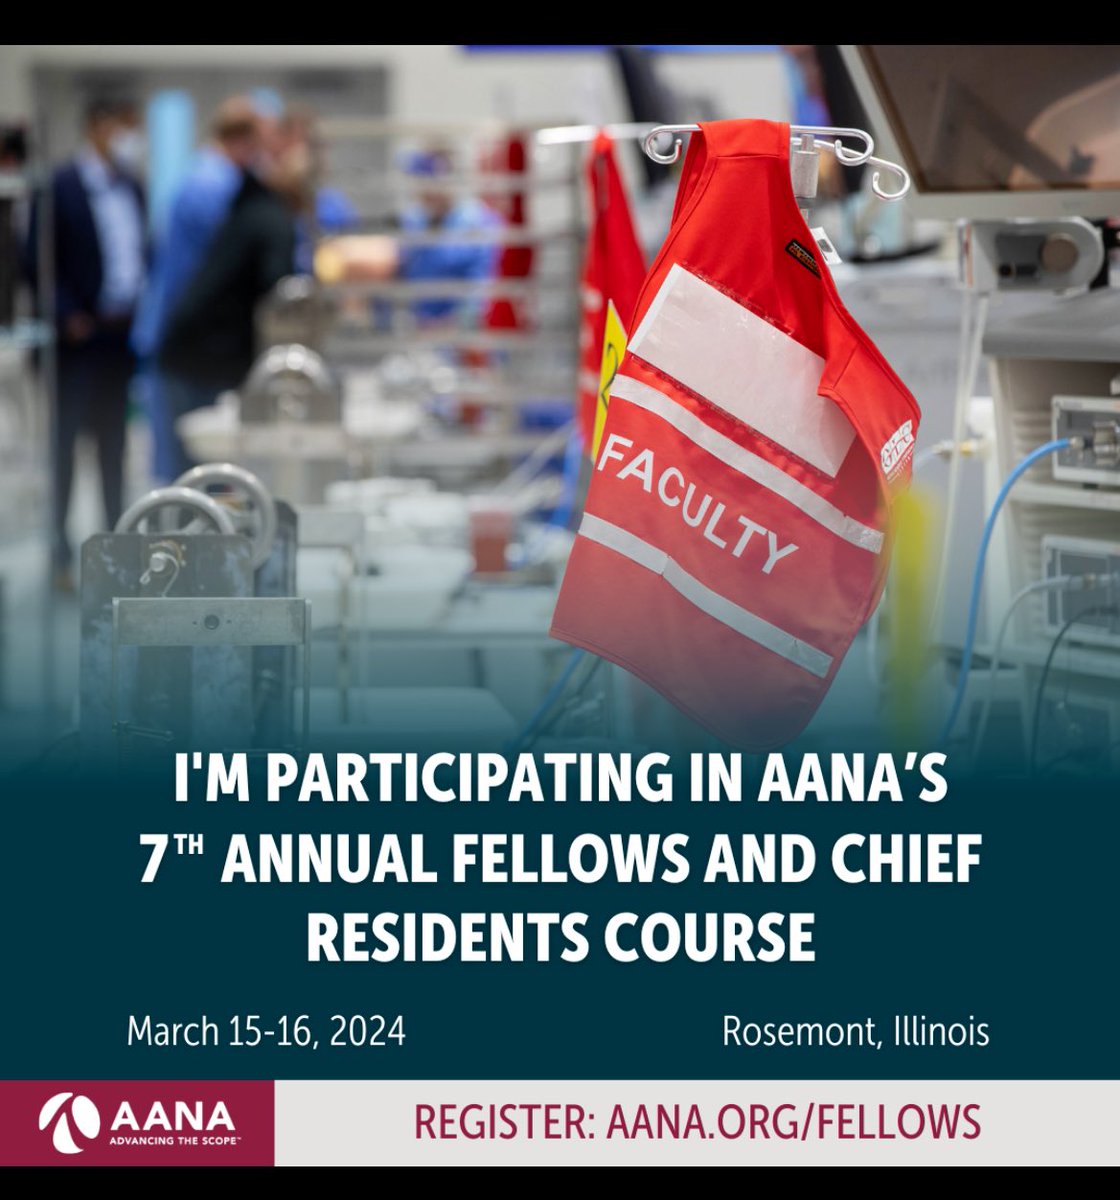 Excited to part of the lineup at the 7th Annual AANA Fellows and Chief Residents Course March 15-16 Discover leading concepts and gain the tools you need to succeed in a career in arthroscopy and minimally invasive surgery. Register at aana.org/fellows